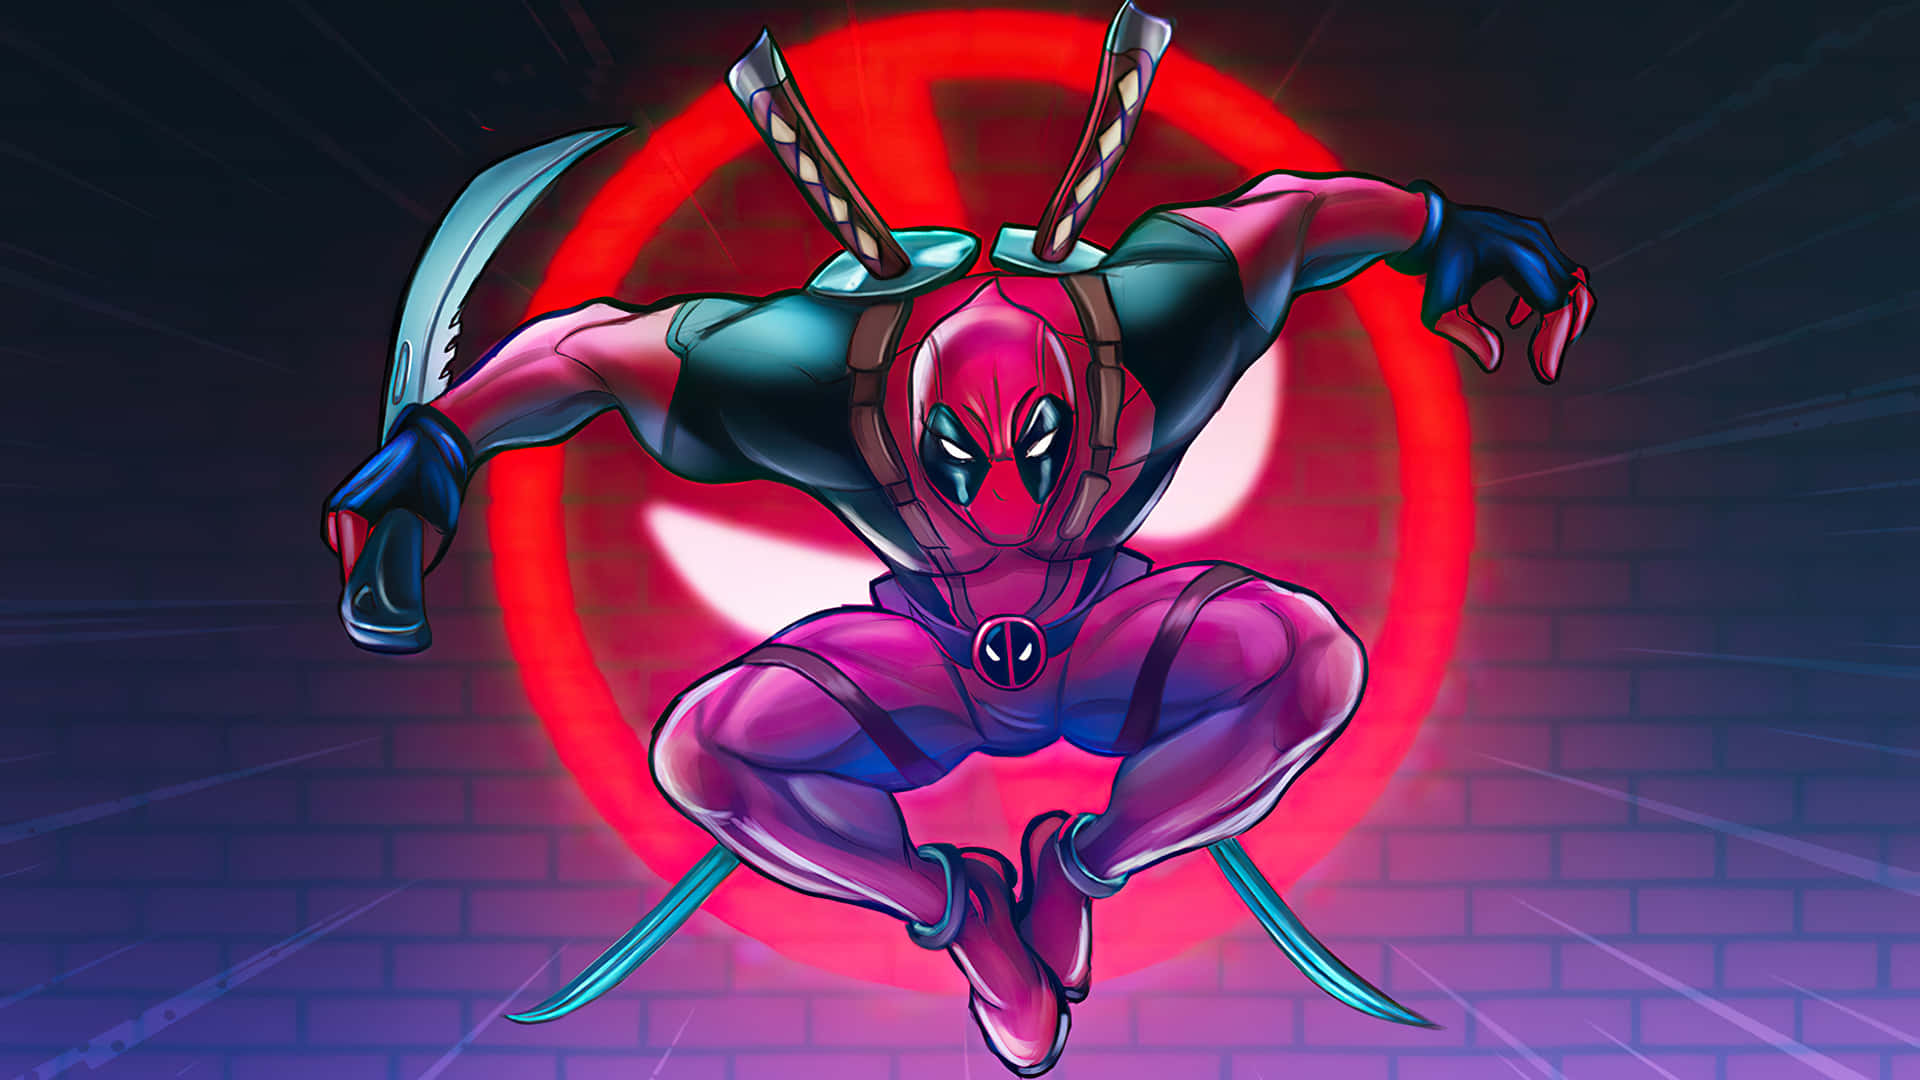 Comic Deadpool Background Illustration With His Logo